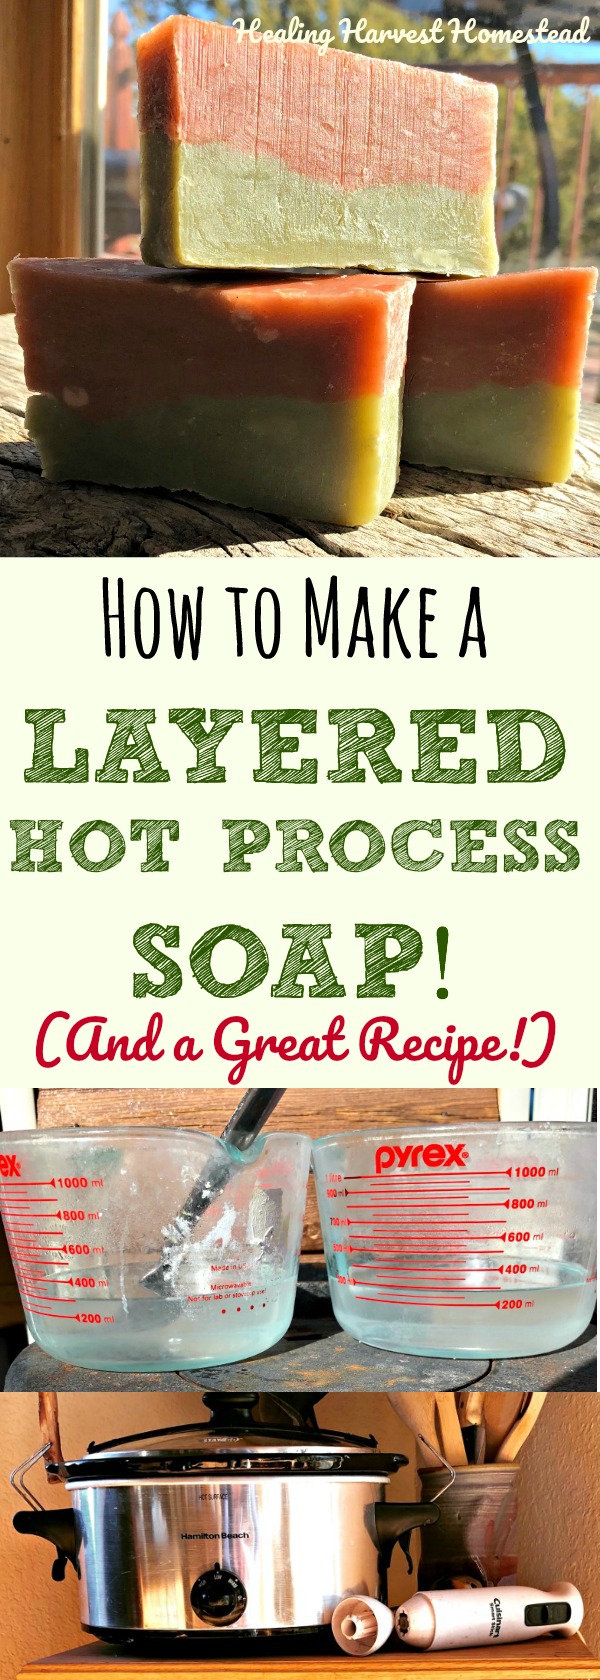 Basic Knowledge of Cold Process Soap Colorants and How to Use It